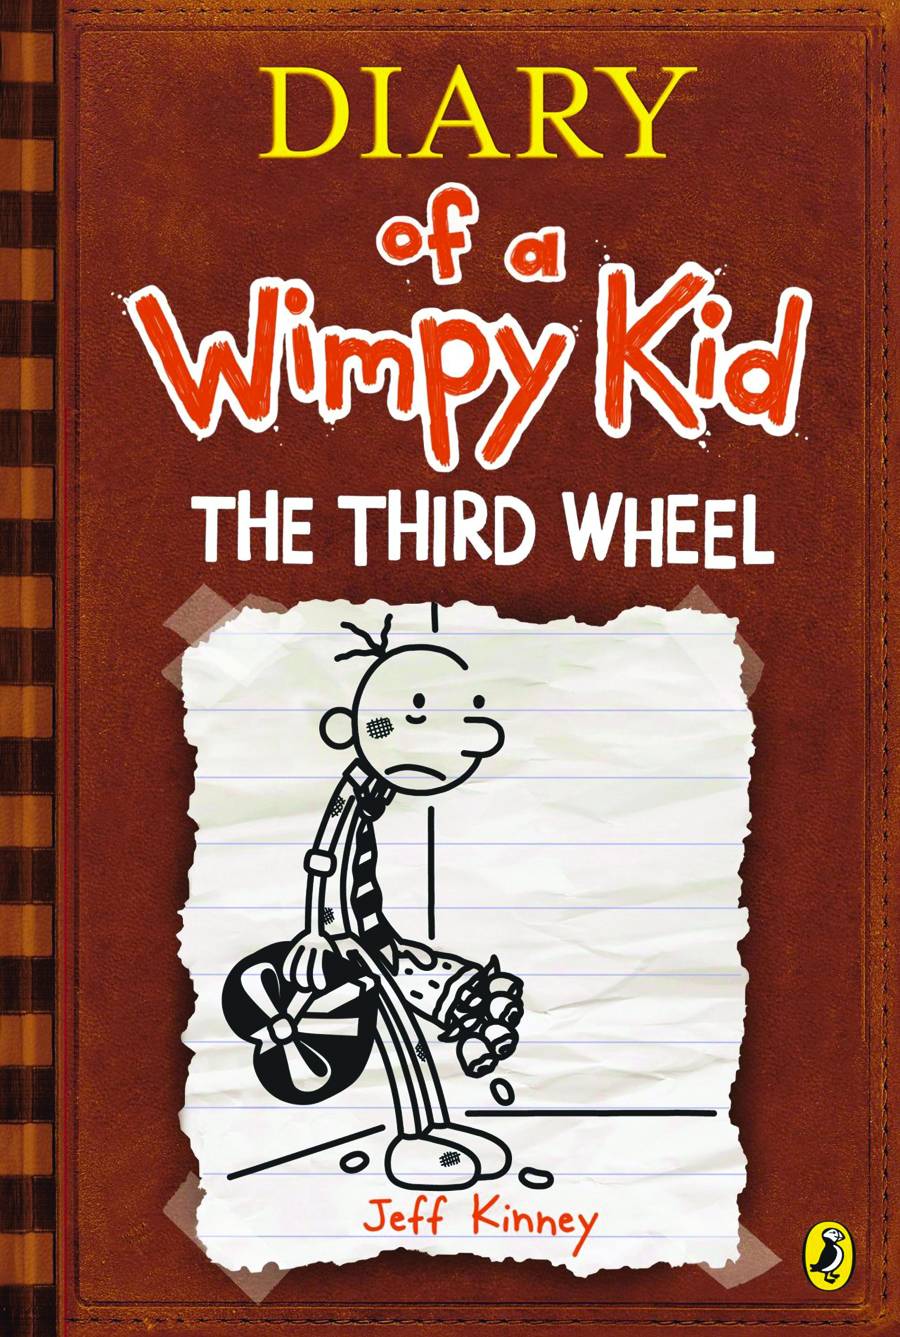 Diary of a Wimpy Kid Hardcover Volume 7 Third Wheel